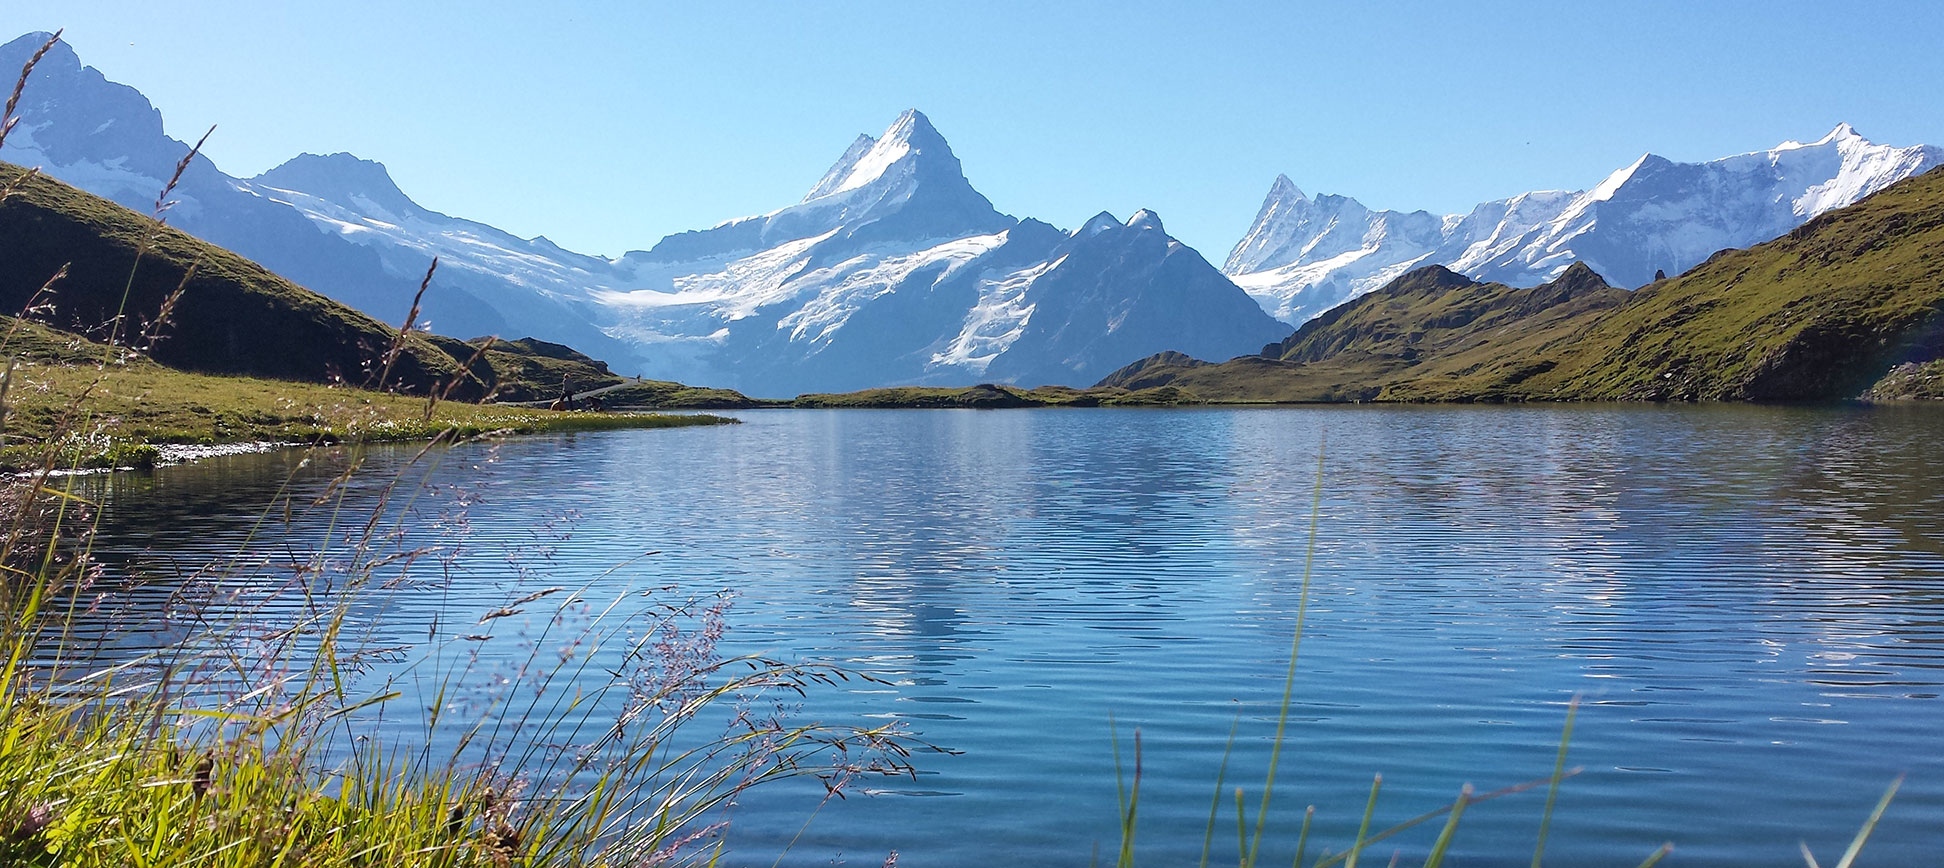 Bachalpsee and Schreckhorn, a 4,078-m tall mountain in the Bernese Alps near Grindelwald.